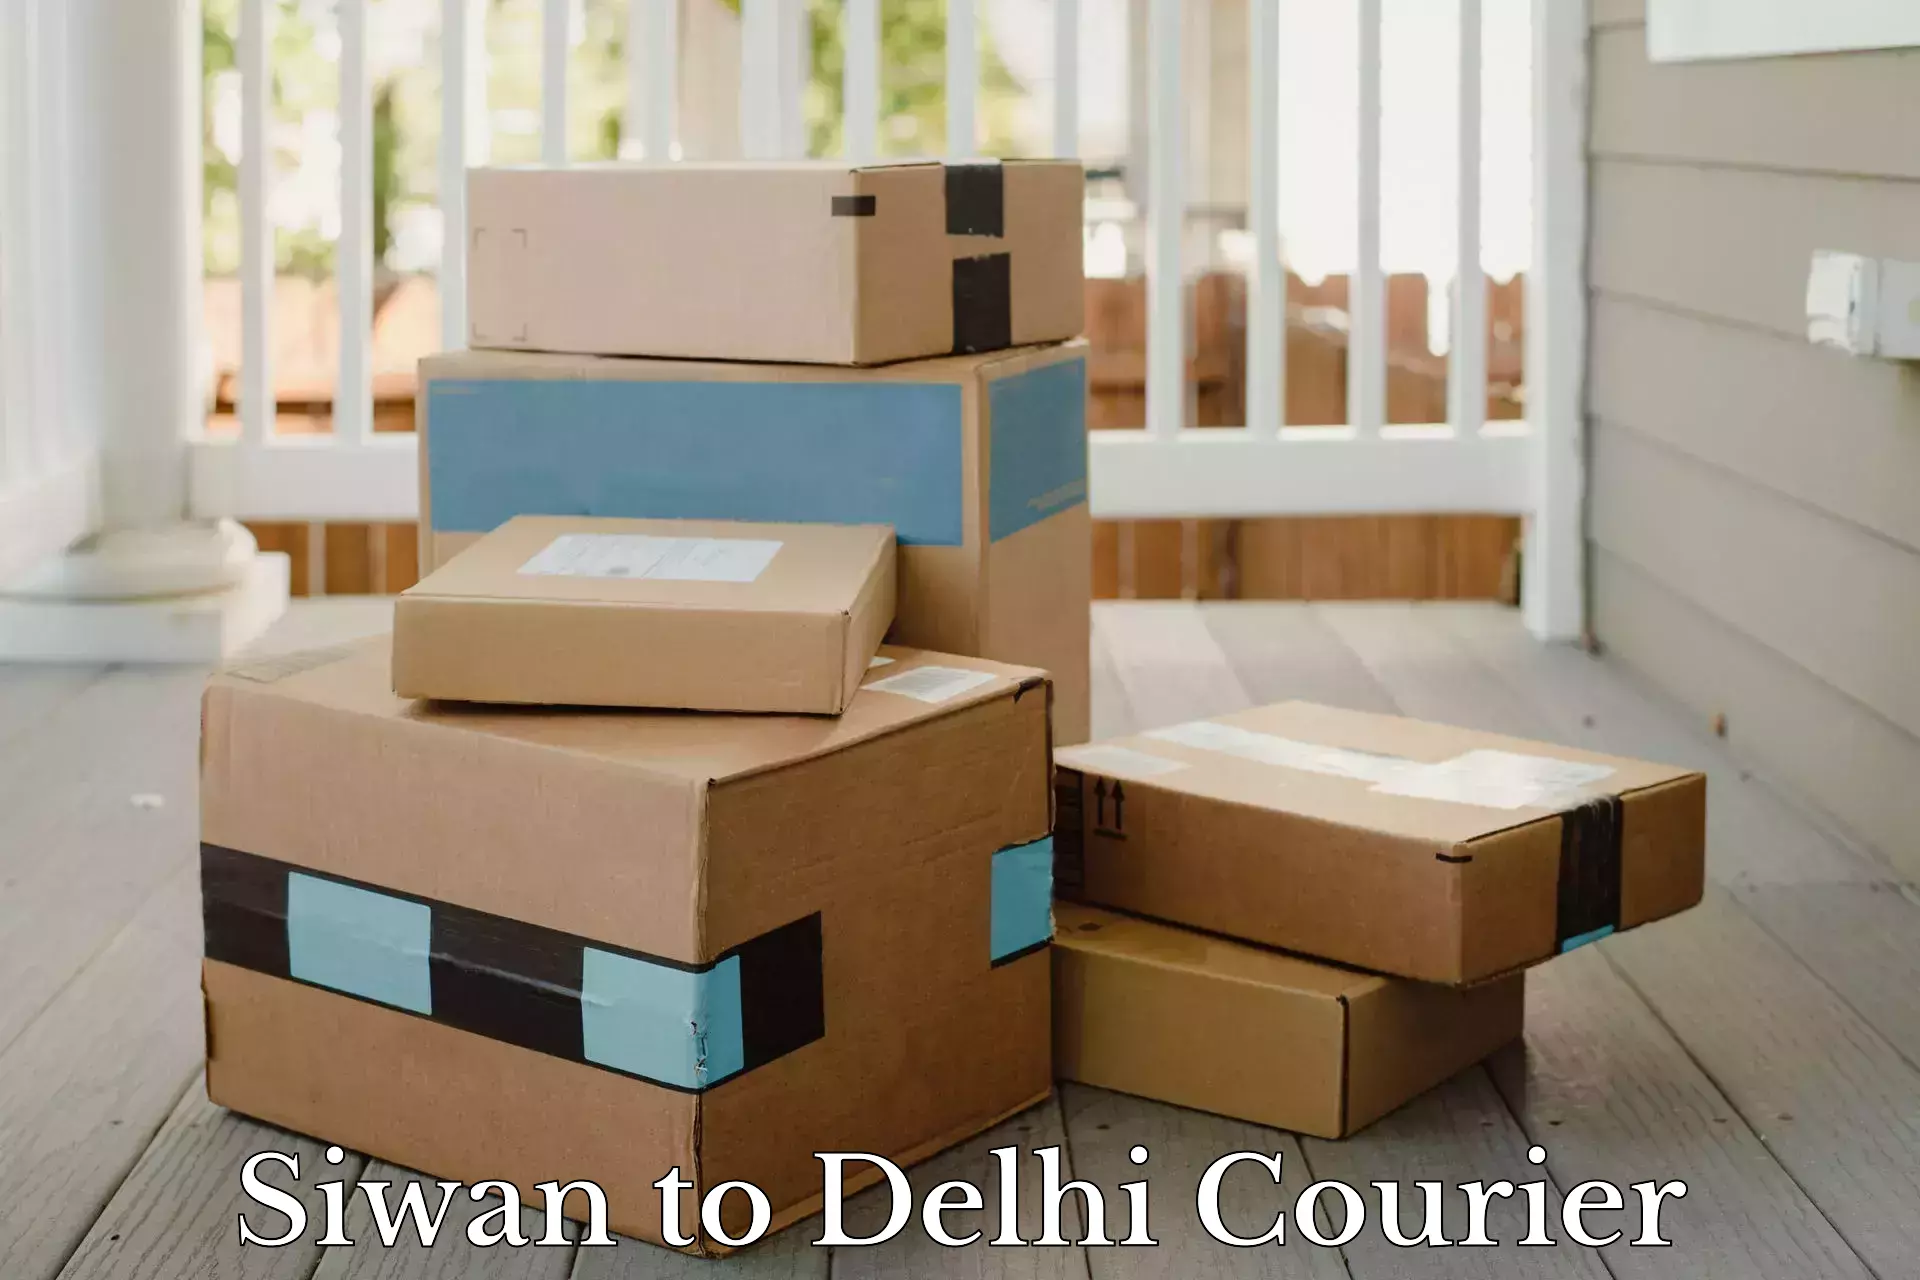 Subscription-based courier Siwan to Delhi